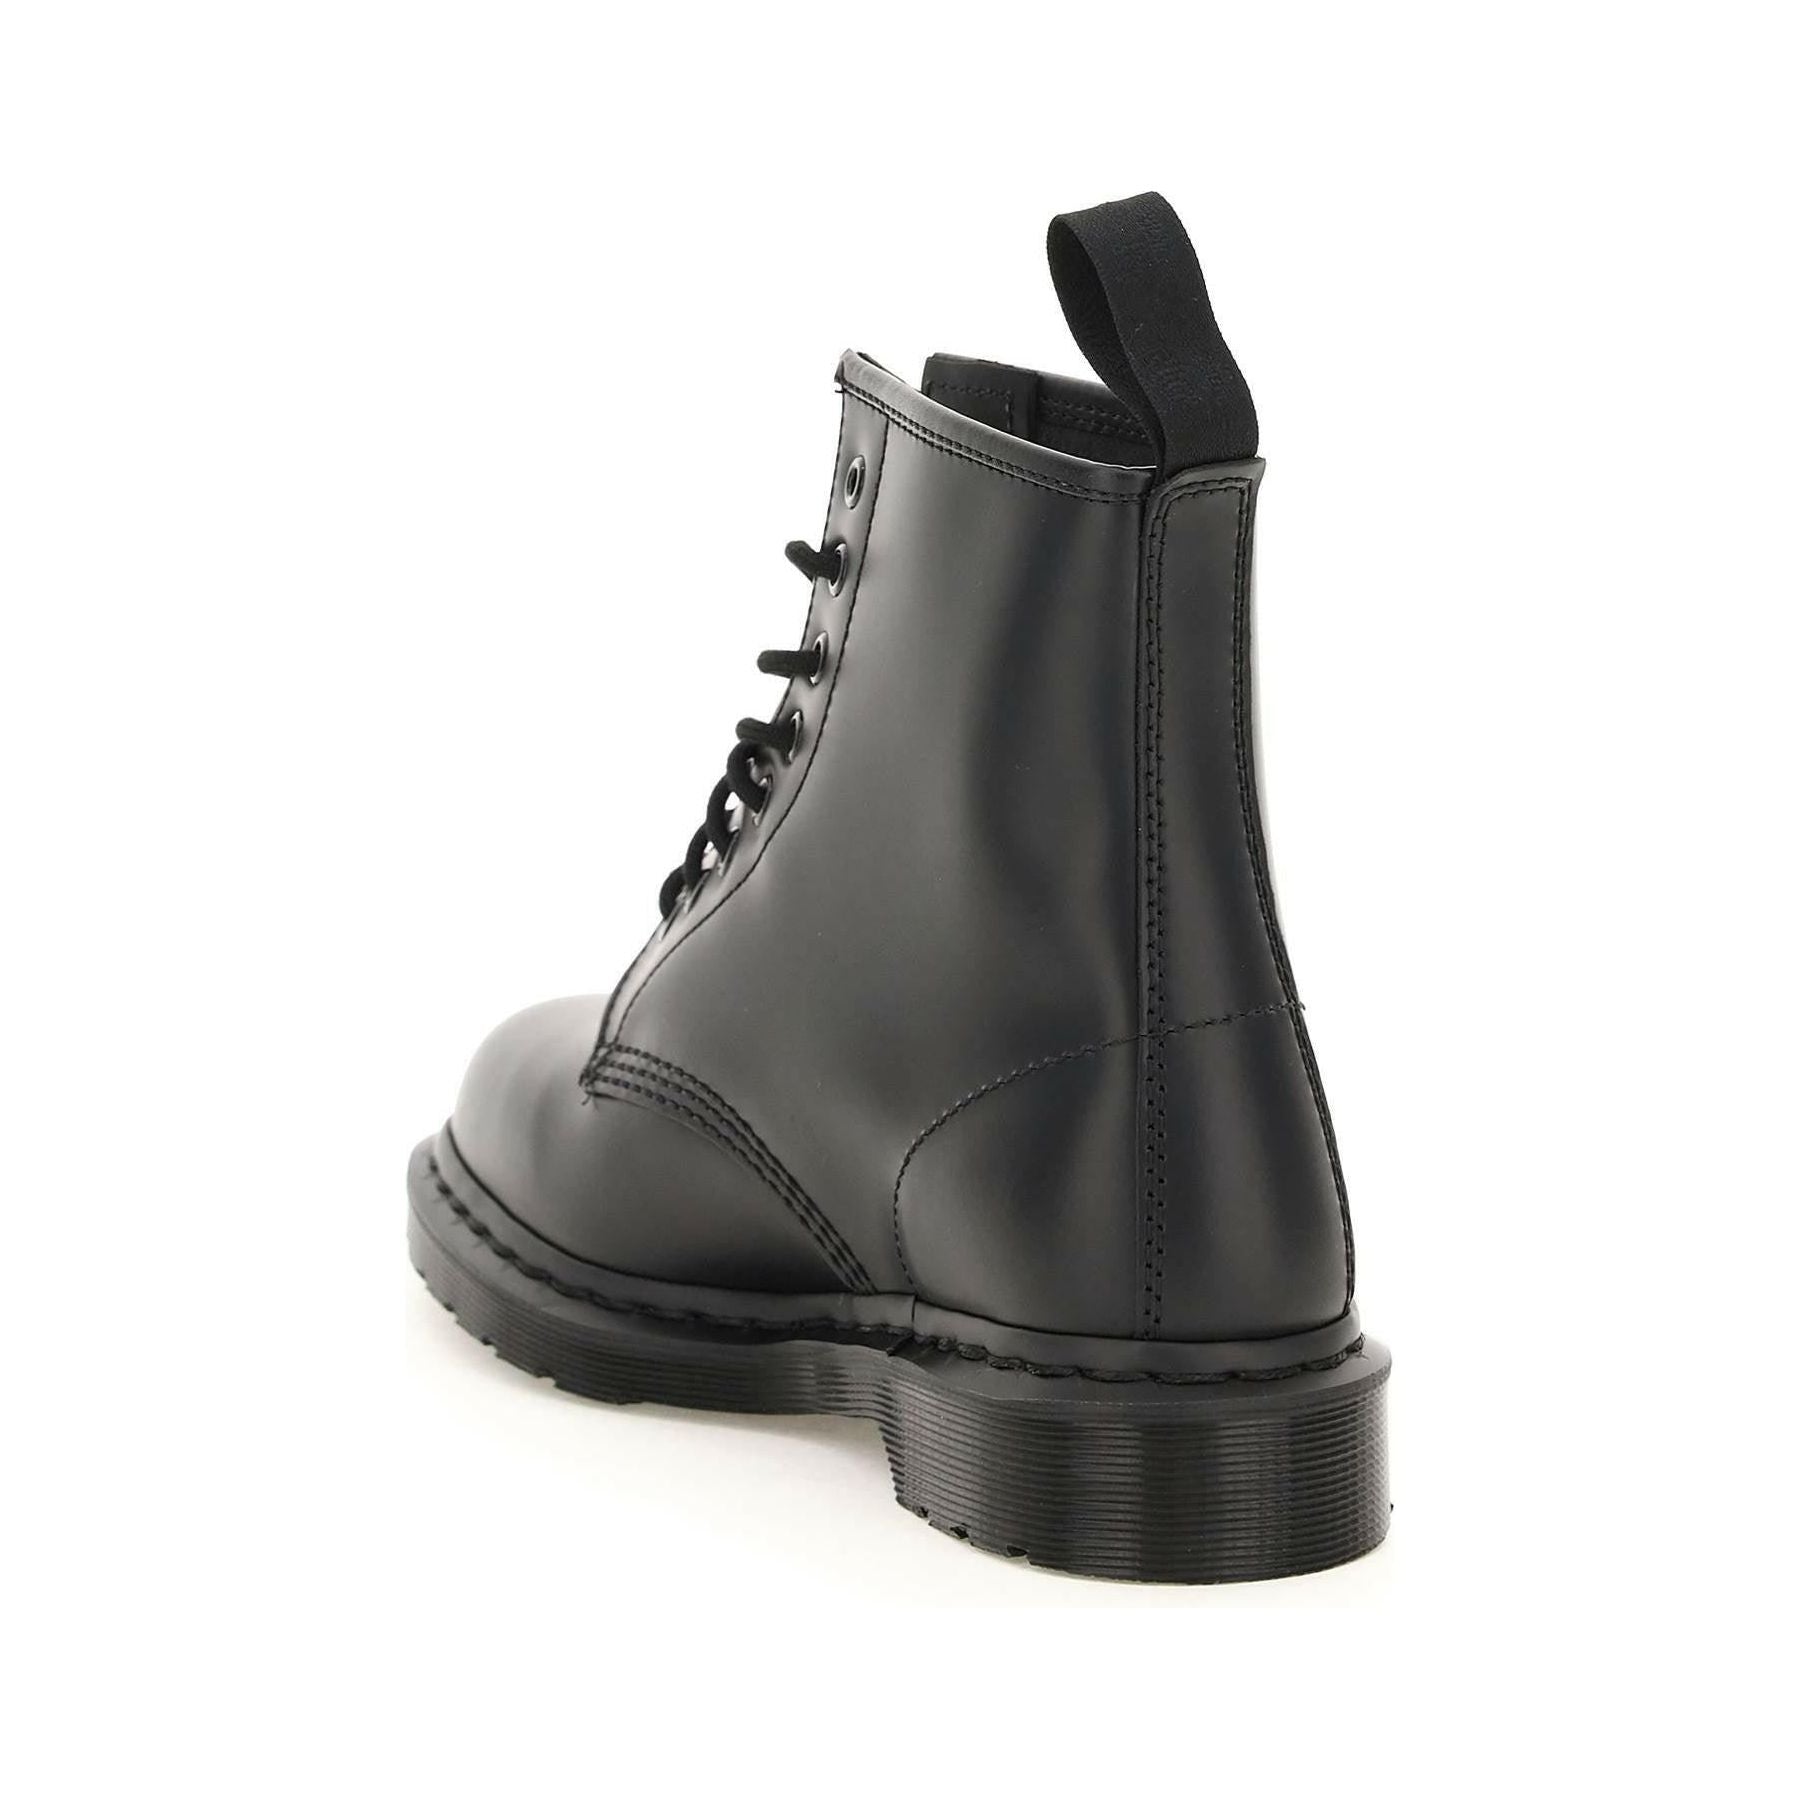 1460 Mono Smooth Leather Lace Up Boots DR.MARTENS JOHN JULIA.